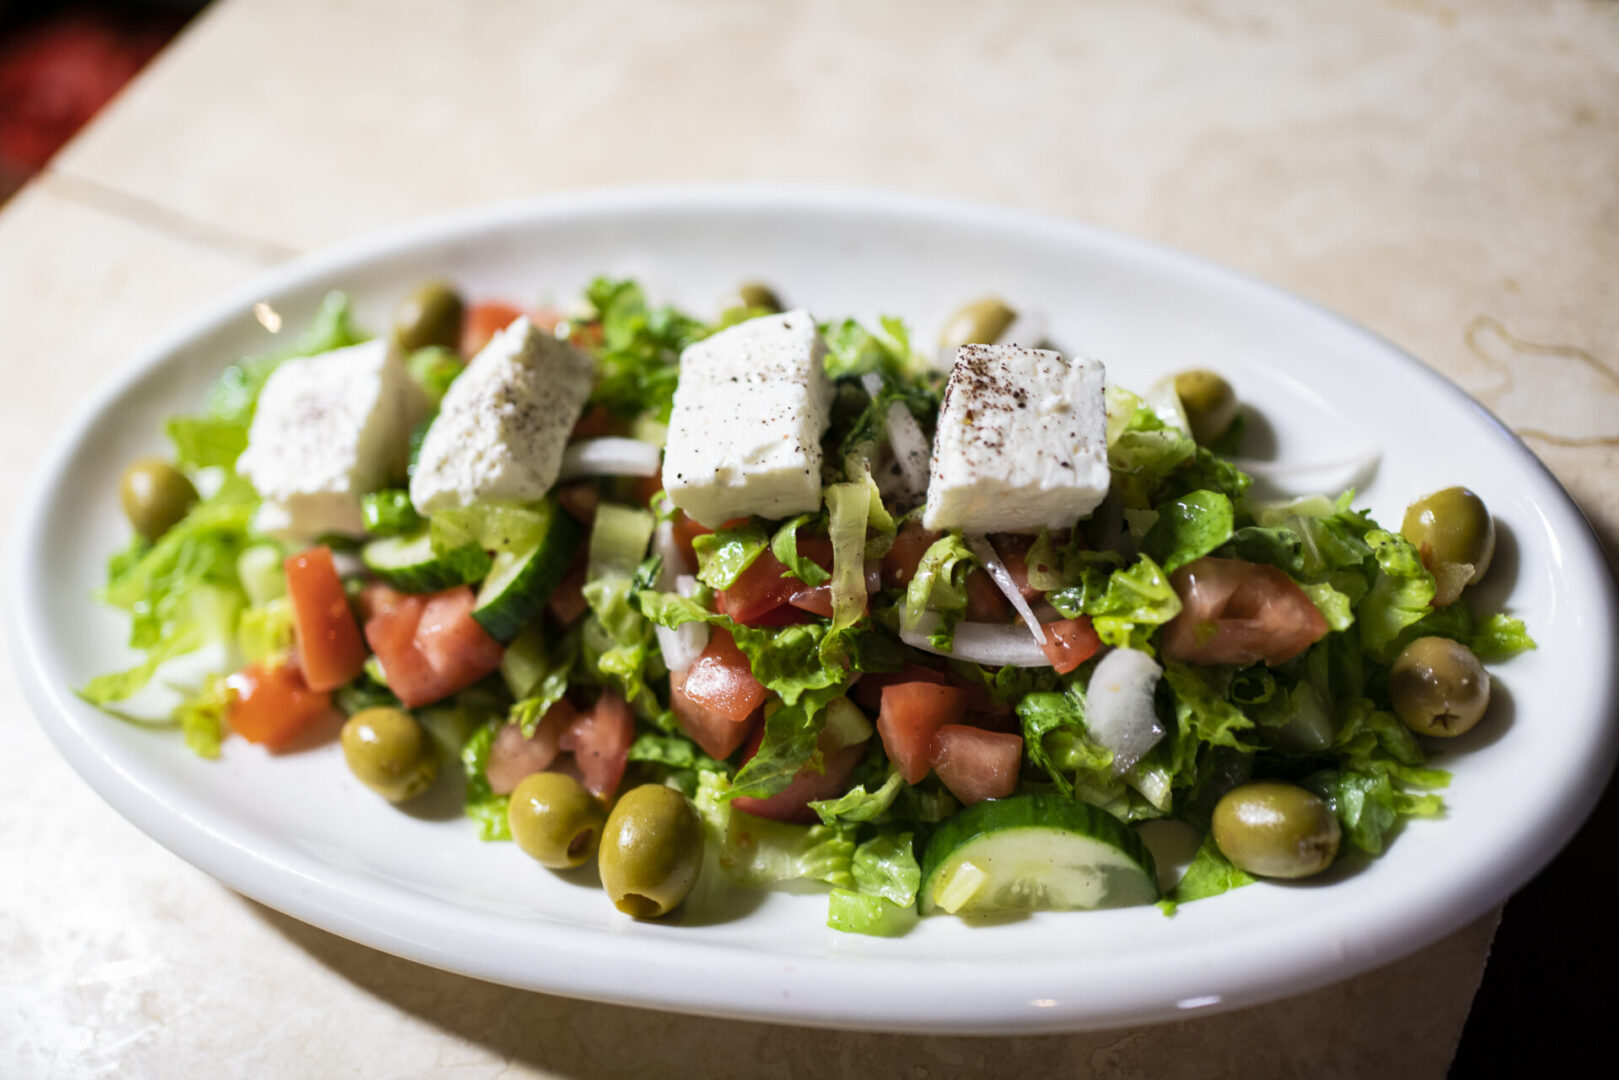 A Mediterranean salad with cheese